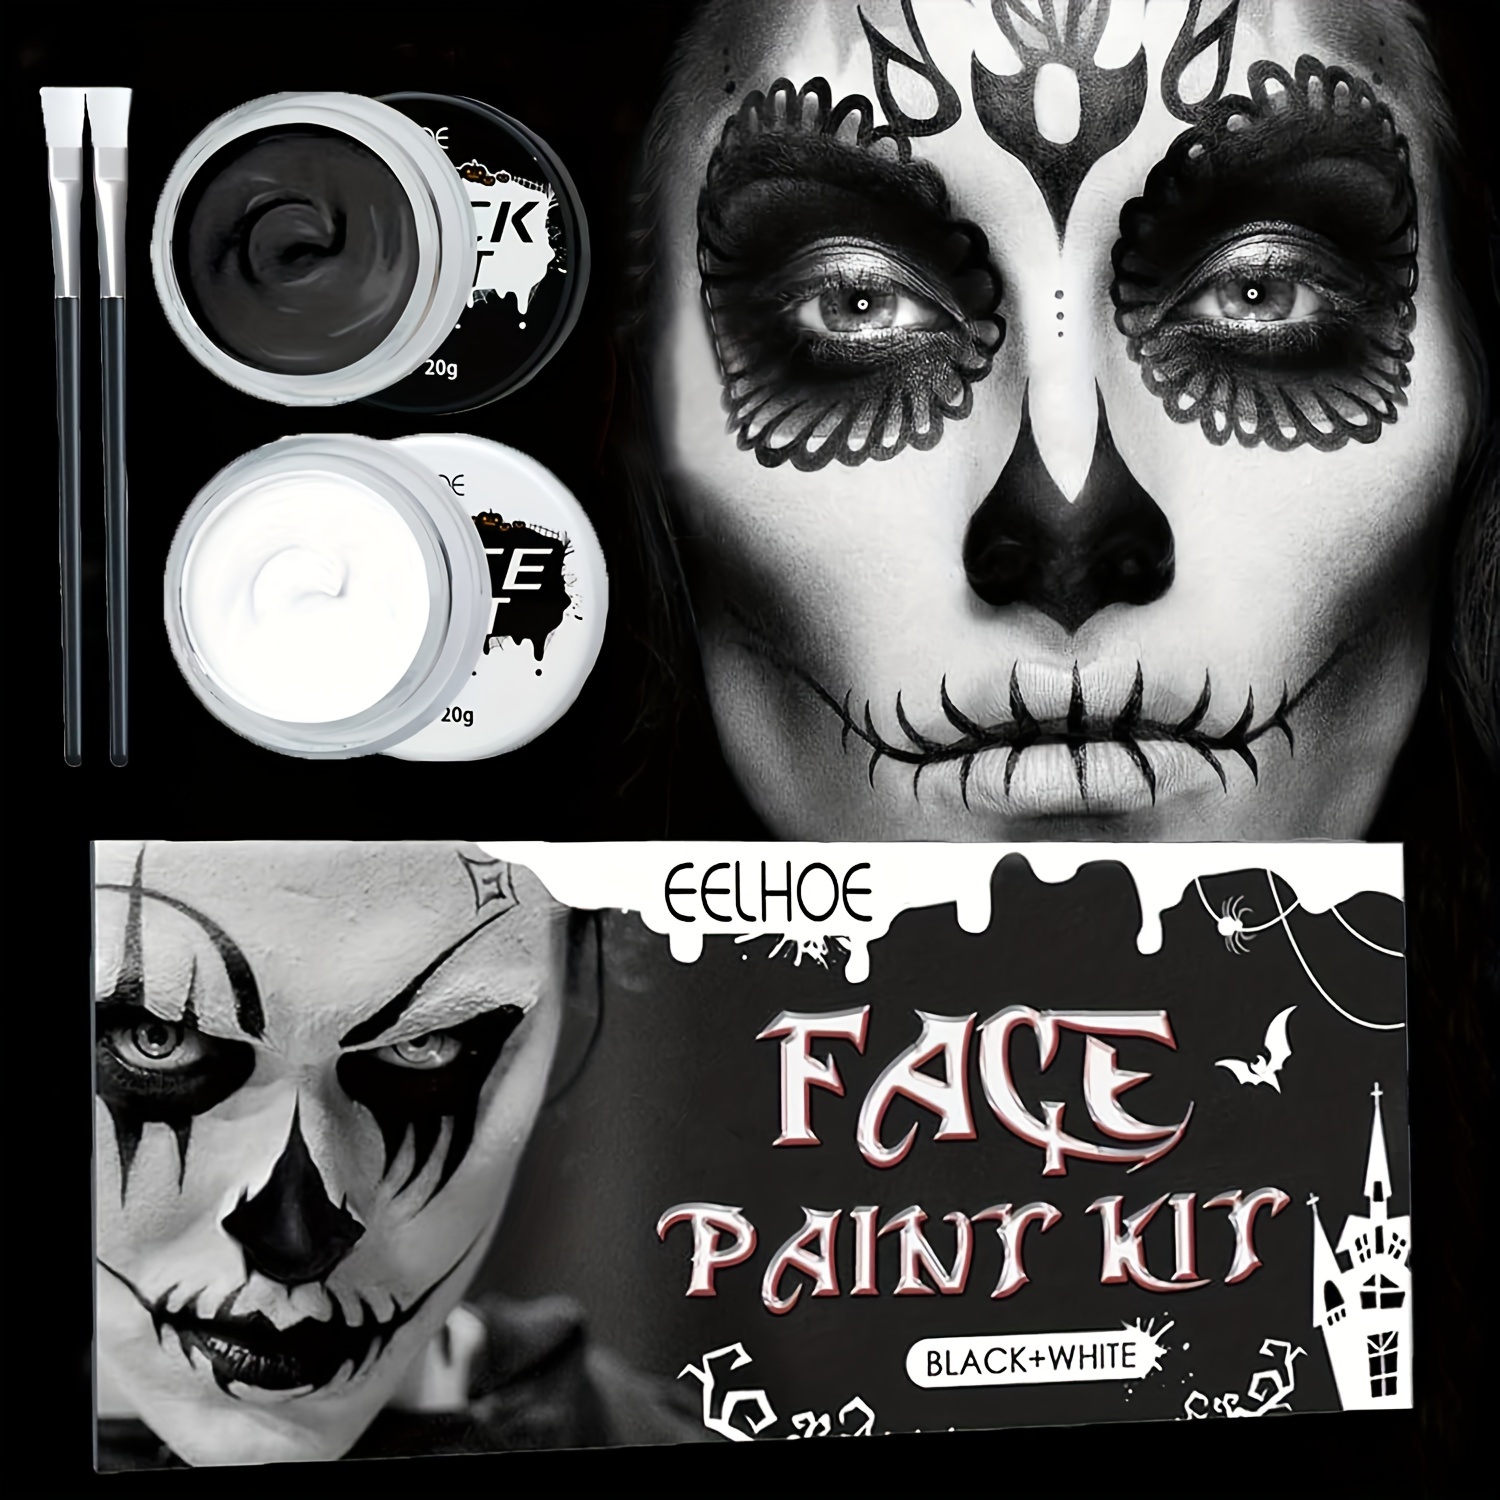 Halloween Face Paint Black And White Body Painting Kit Makeup Set